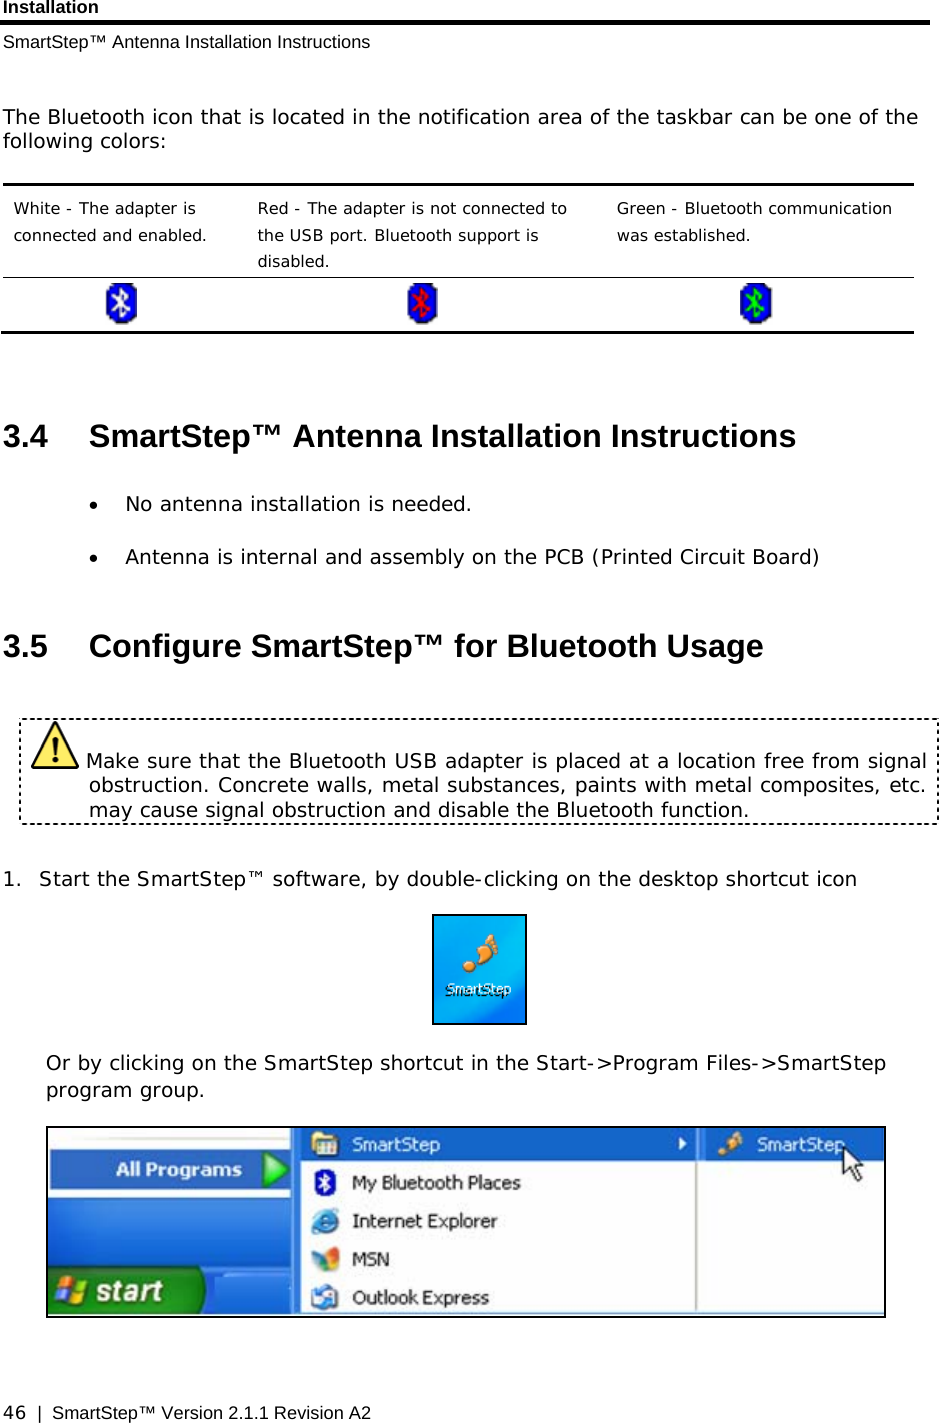 Installation SmartStep™ Antenna Installation Instructions  46  |  SmartStep™ Version 2.1.1 Revision A2  The Bluetooth icon that is located in the notification area of the taskbar can be one of the following colors:  White - The adapter is connected and enabled. Red - The adapter is not connected to the USB port. Bluetooth support is disabled. Green - Bluetooth communication was established.        3.4  SmartStep™ Antenna Installation Instructions • No antenna installation is needed. • Antenna is internal and assembly on the PCB (Printed Circuit Board)  3.5  Configure SmartStep™ for Bluetooth Usage   Make sure that the Bluetooth USB adapter is placed at a location free from signal obstruction. Concrete walls, metal substances, paints with metal composites, etc. may cause signal obstruction and disable the Bluetooth function.      1. Start the SmartStep™ software, by double-clicking on the desktop shortcut icon   Or by clicking on the SmartStep shortcut in the Start-&gt;Program Files-&gt;SmartStep program group.   